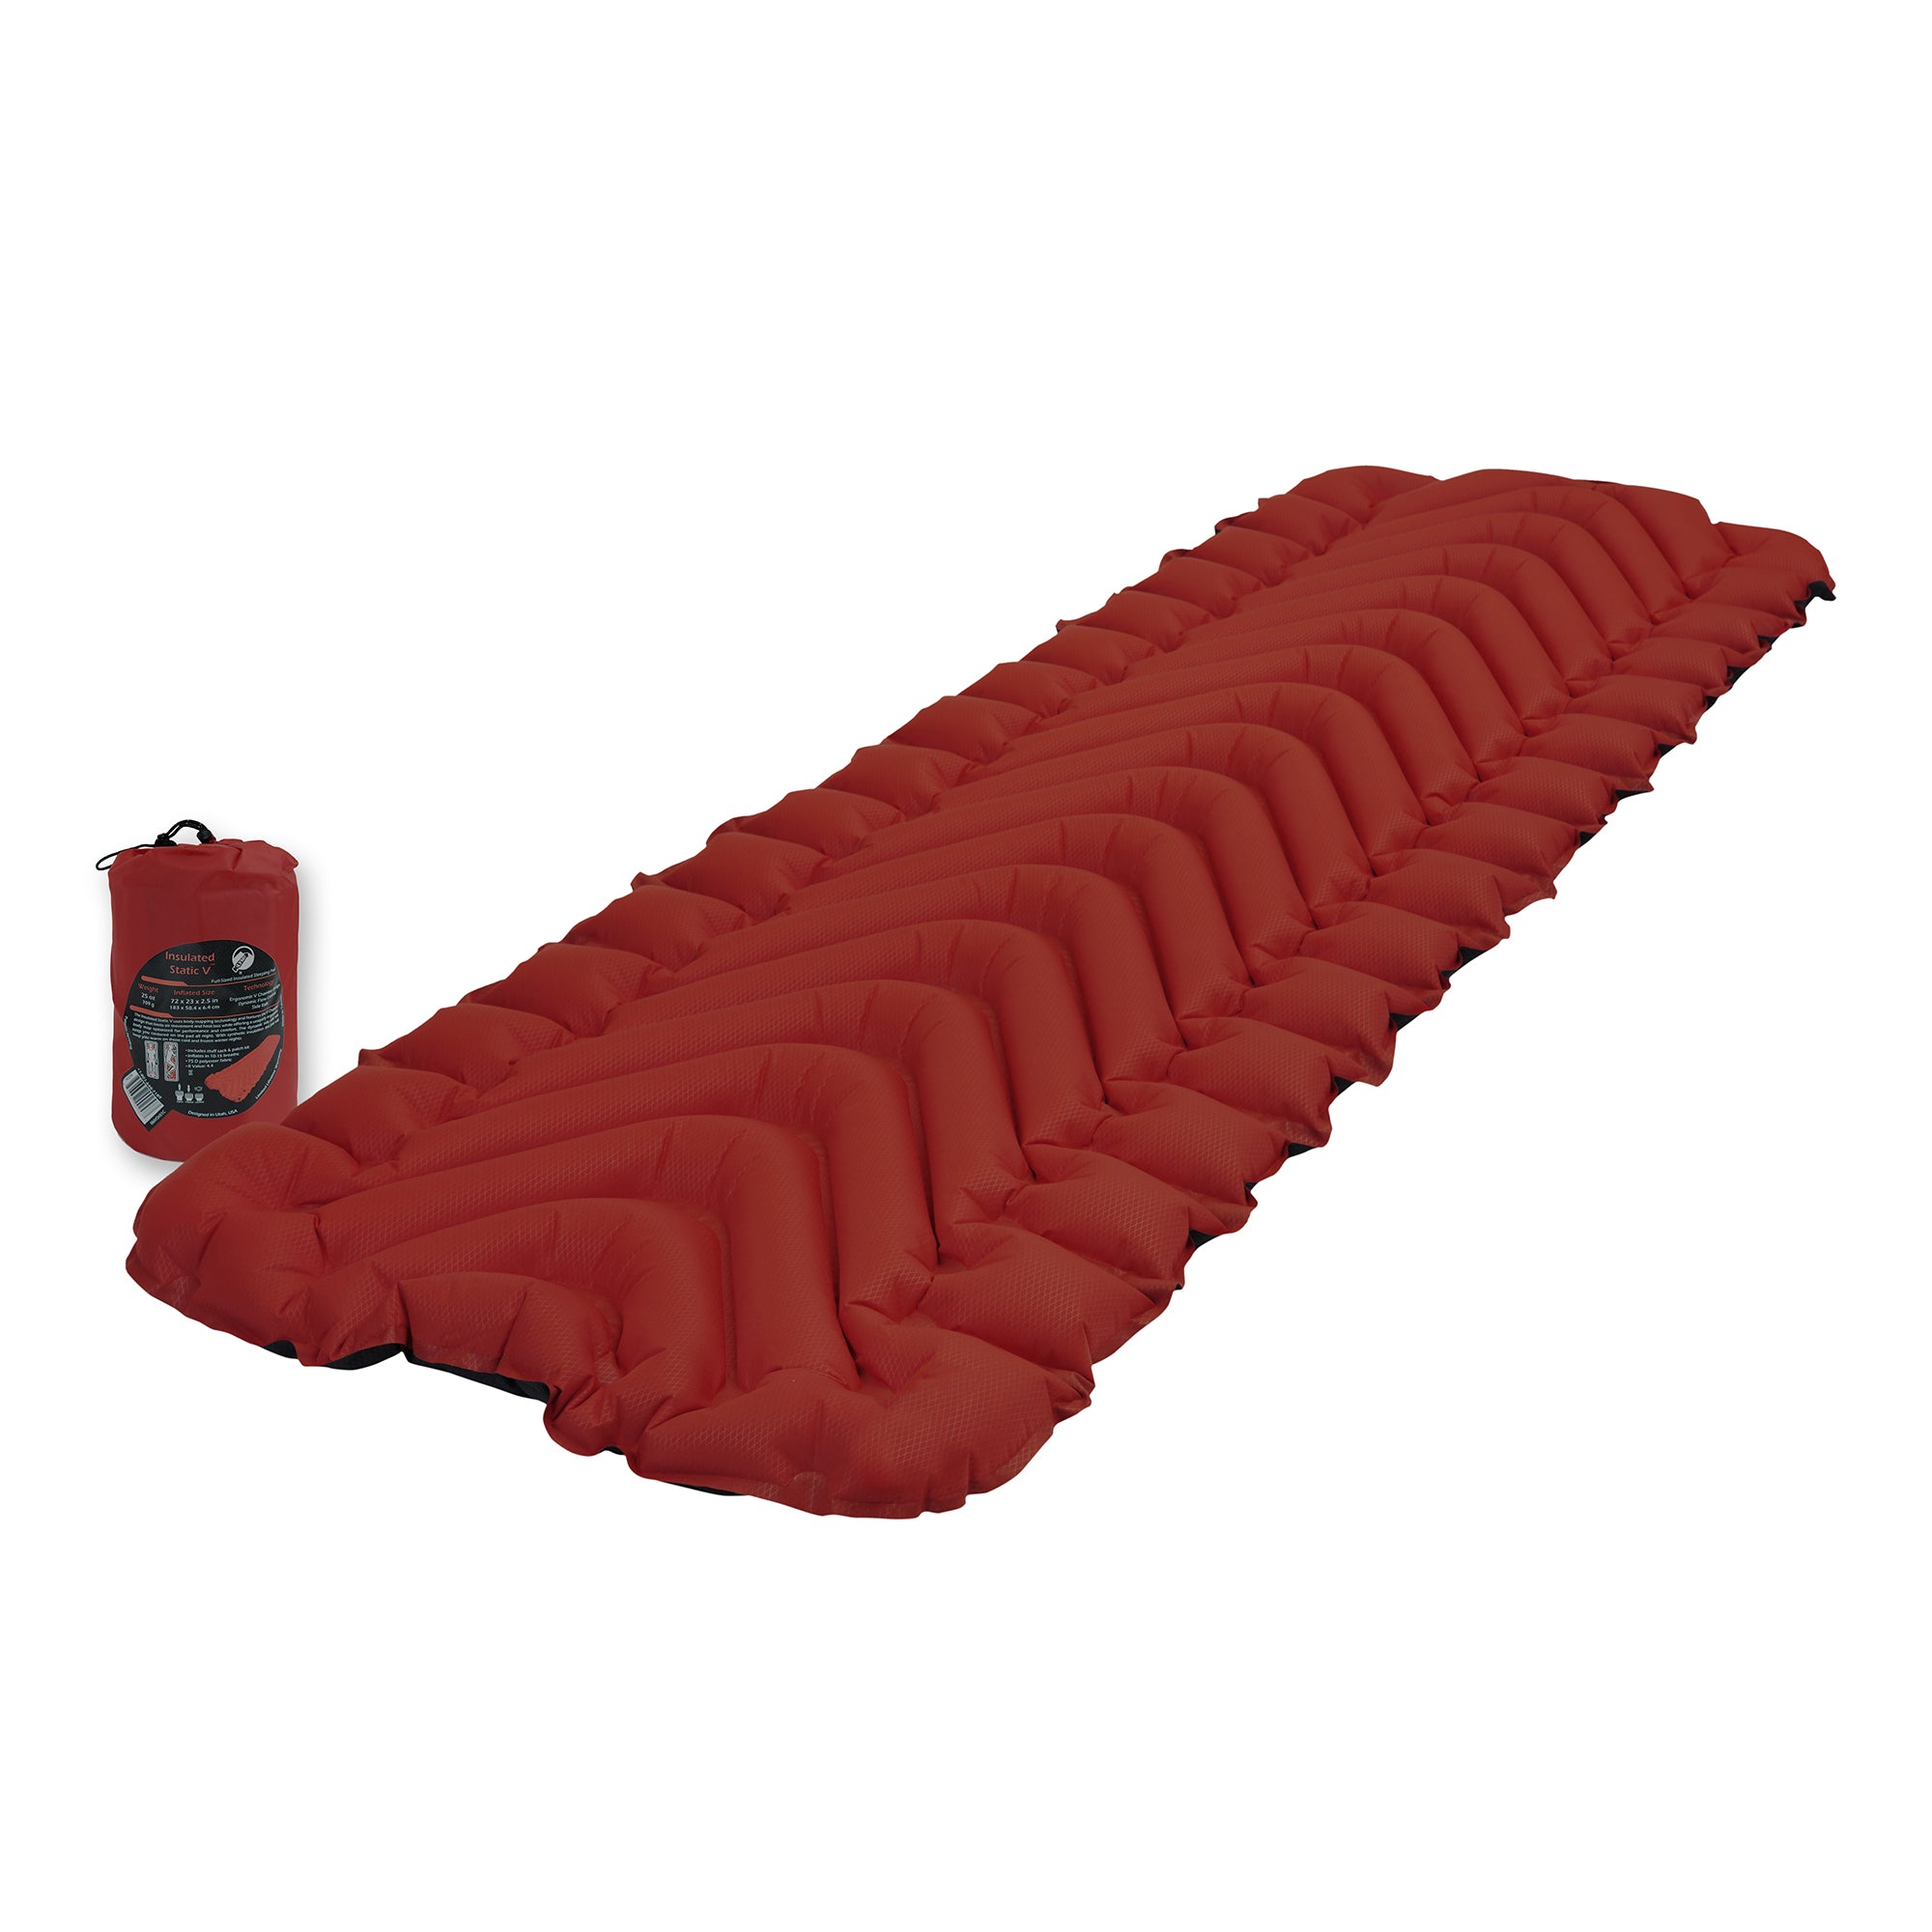 Insulated Static V Sleeping Pad, Red, Side Angle